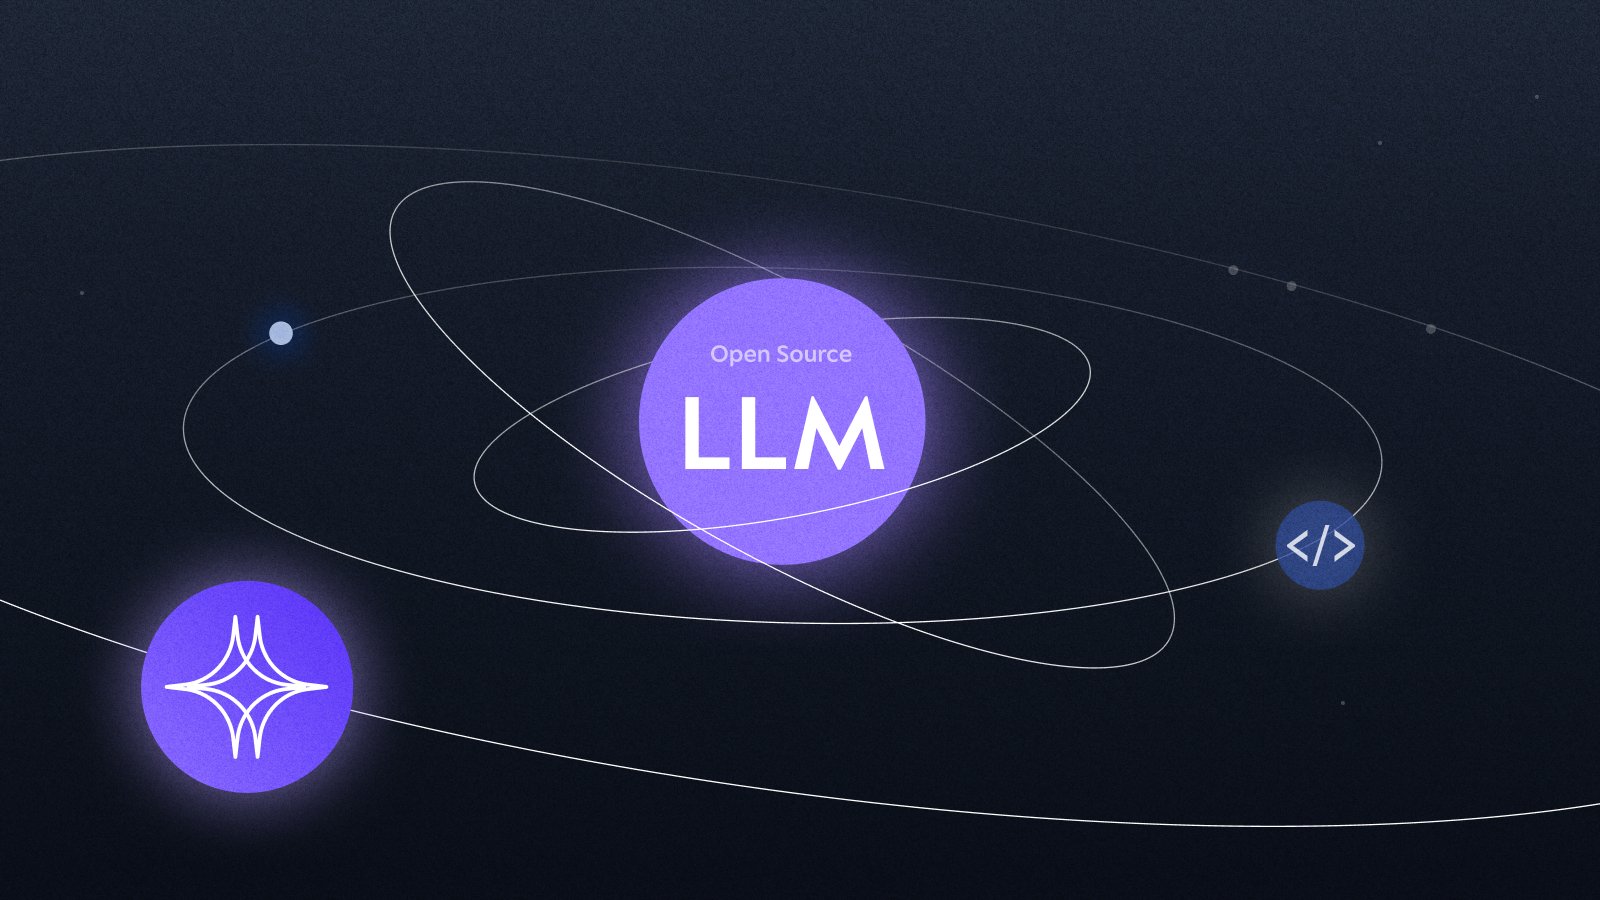 ECOSYSTEM OF OPEN SOURCE LLM AND KOREAN MODEL